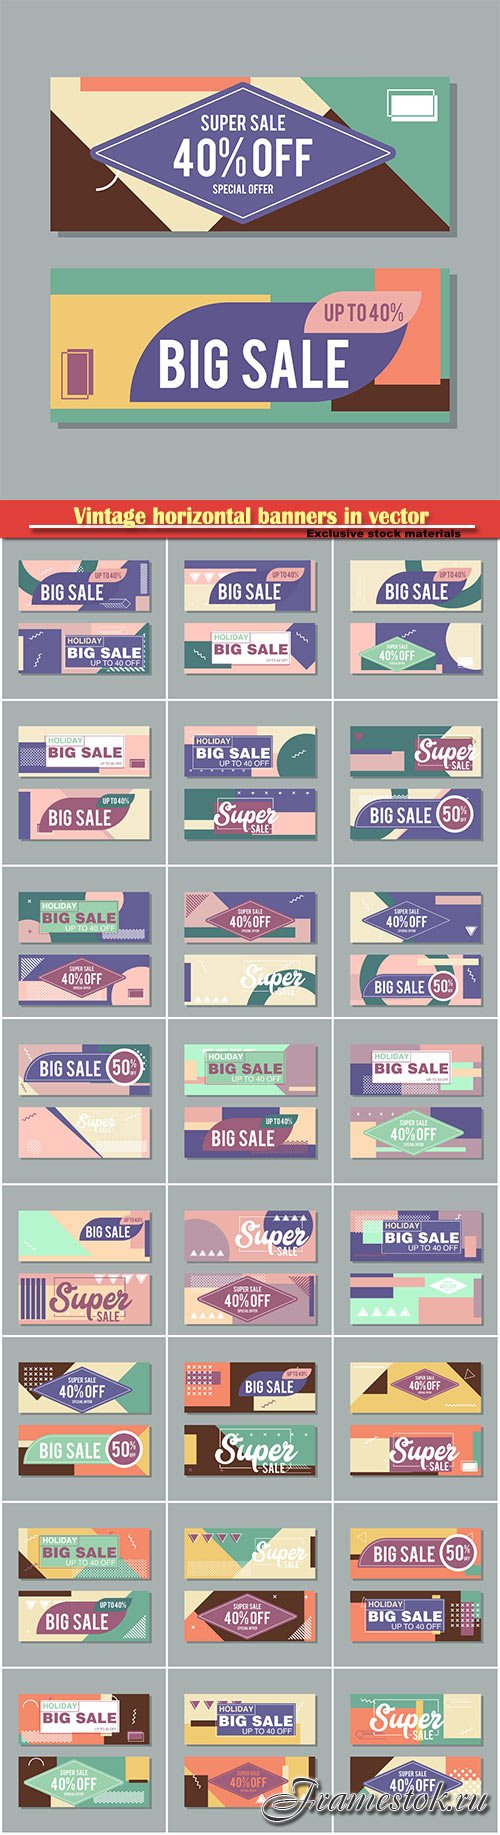 Vintage horizontal banners in vector, discount coupons